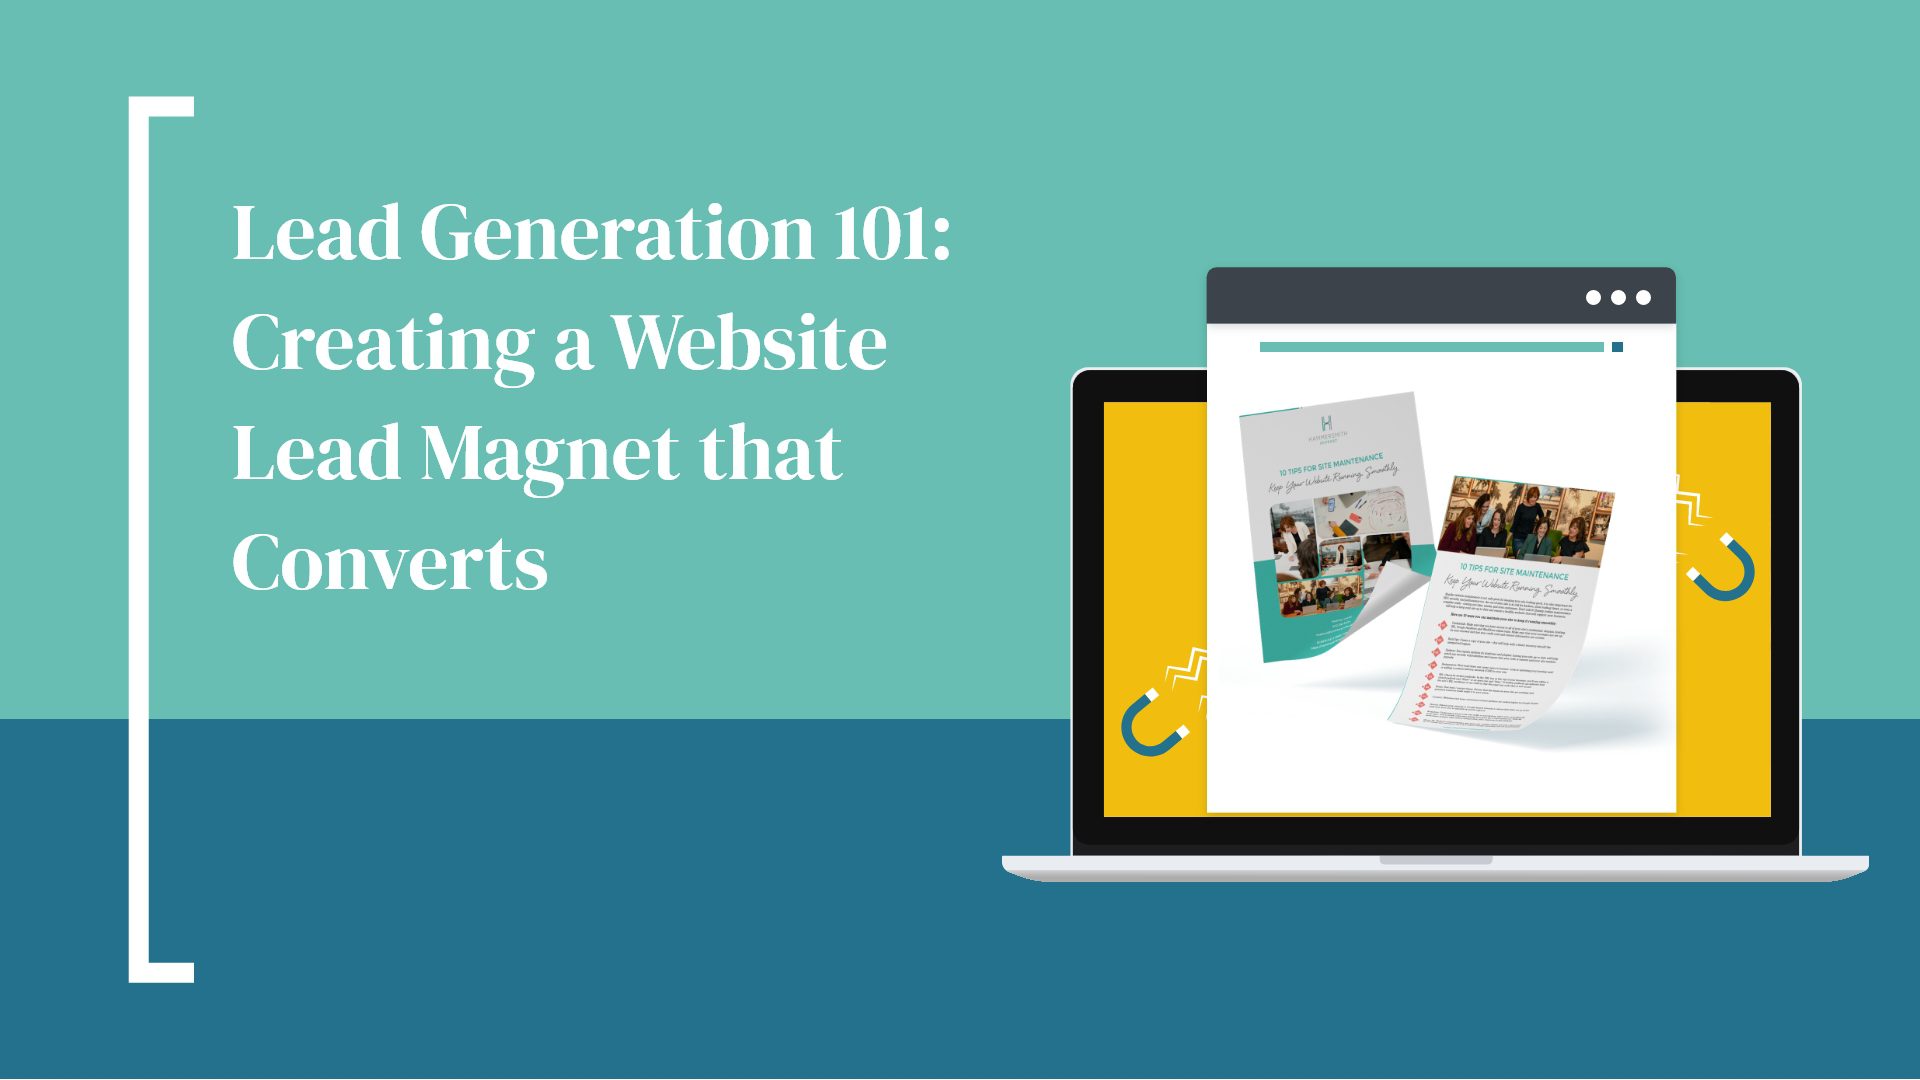 Lead Generation 101: Creating a Website Lead Magnet that Converts